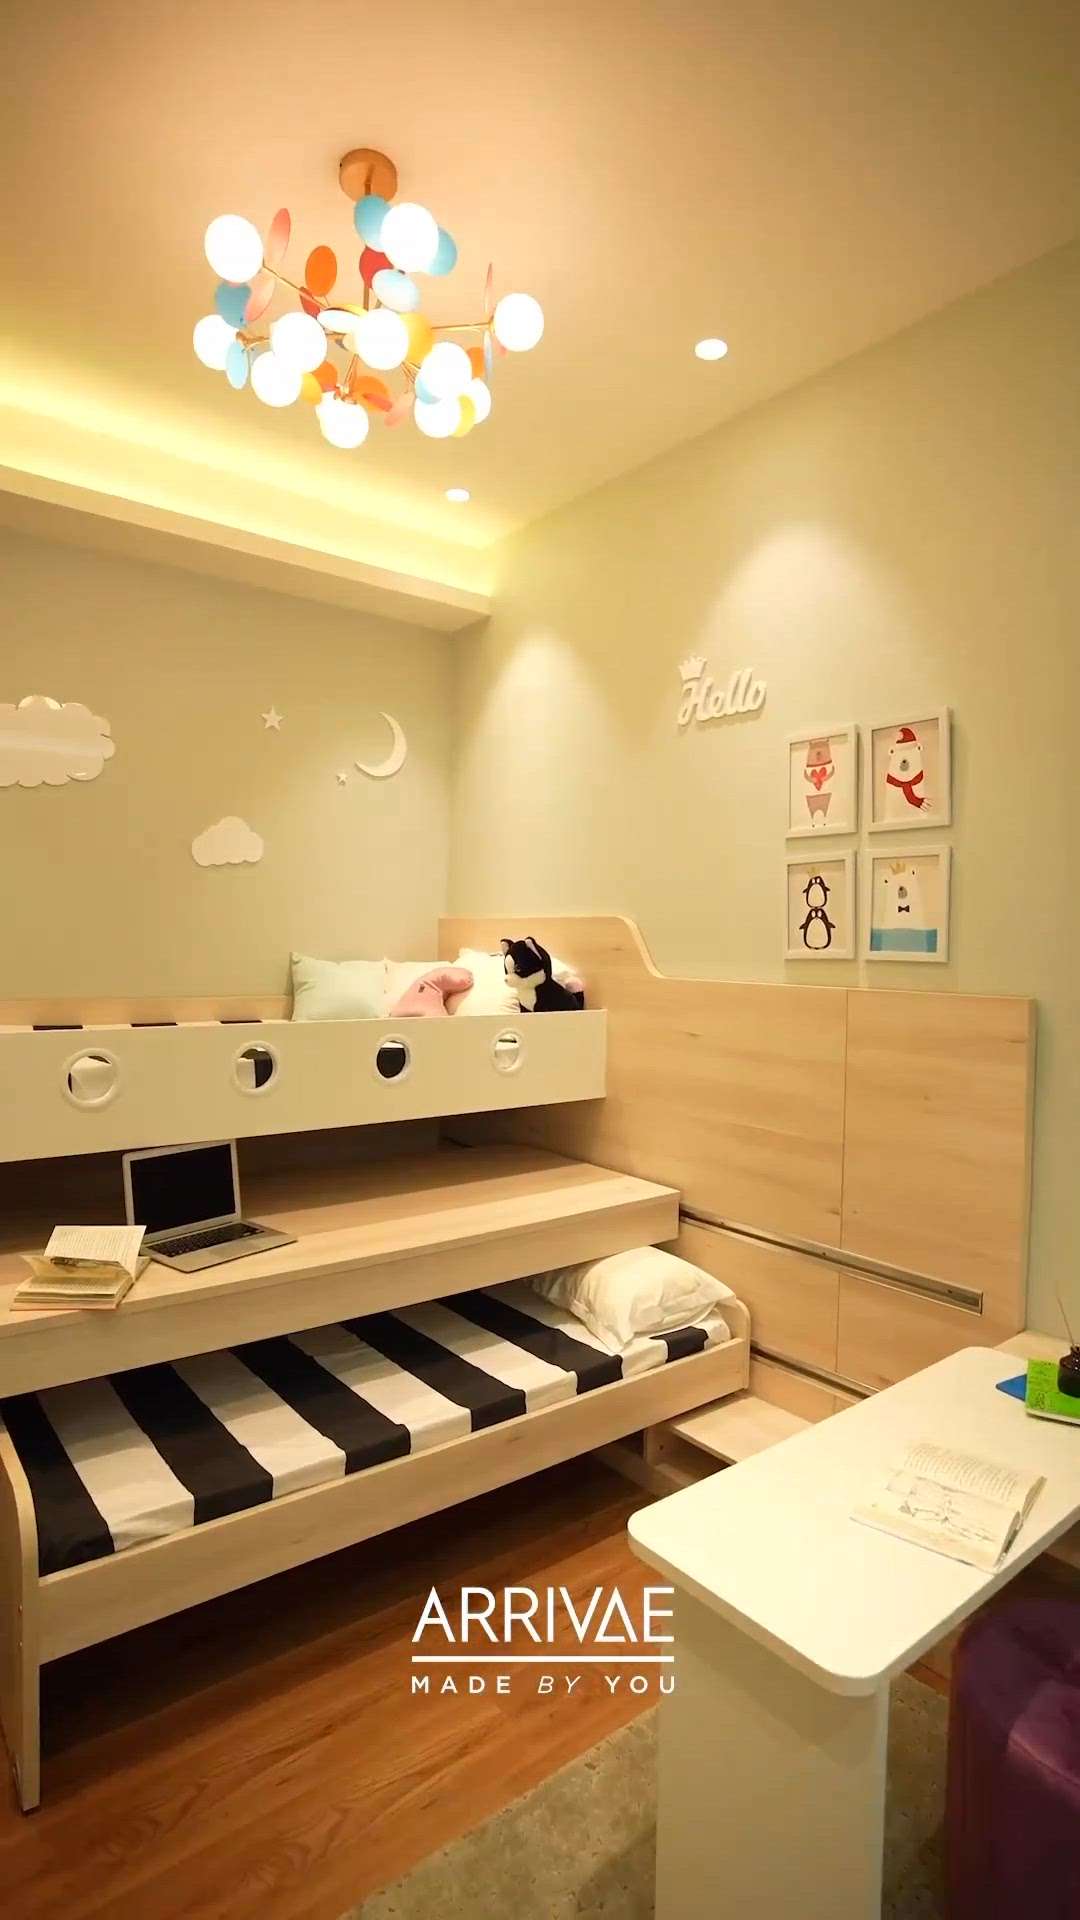 A space where imagination meets comfort and functionality meets playfulness — design a perfect room for your child with #Arrivae!

#hojayega #arrivaekids #kidsroom #kidsroomdecor #kidsroominspo #kidsroomdesign #kidsroominspiration #kidsroomdecoration #kidsroomideas #kidsrooms #kidsroomstyle #kidsroominterior #kidsroomstyling